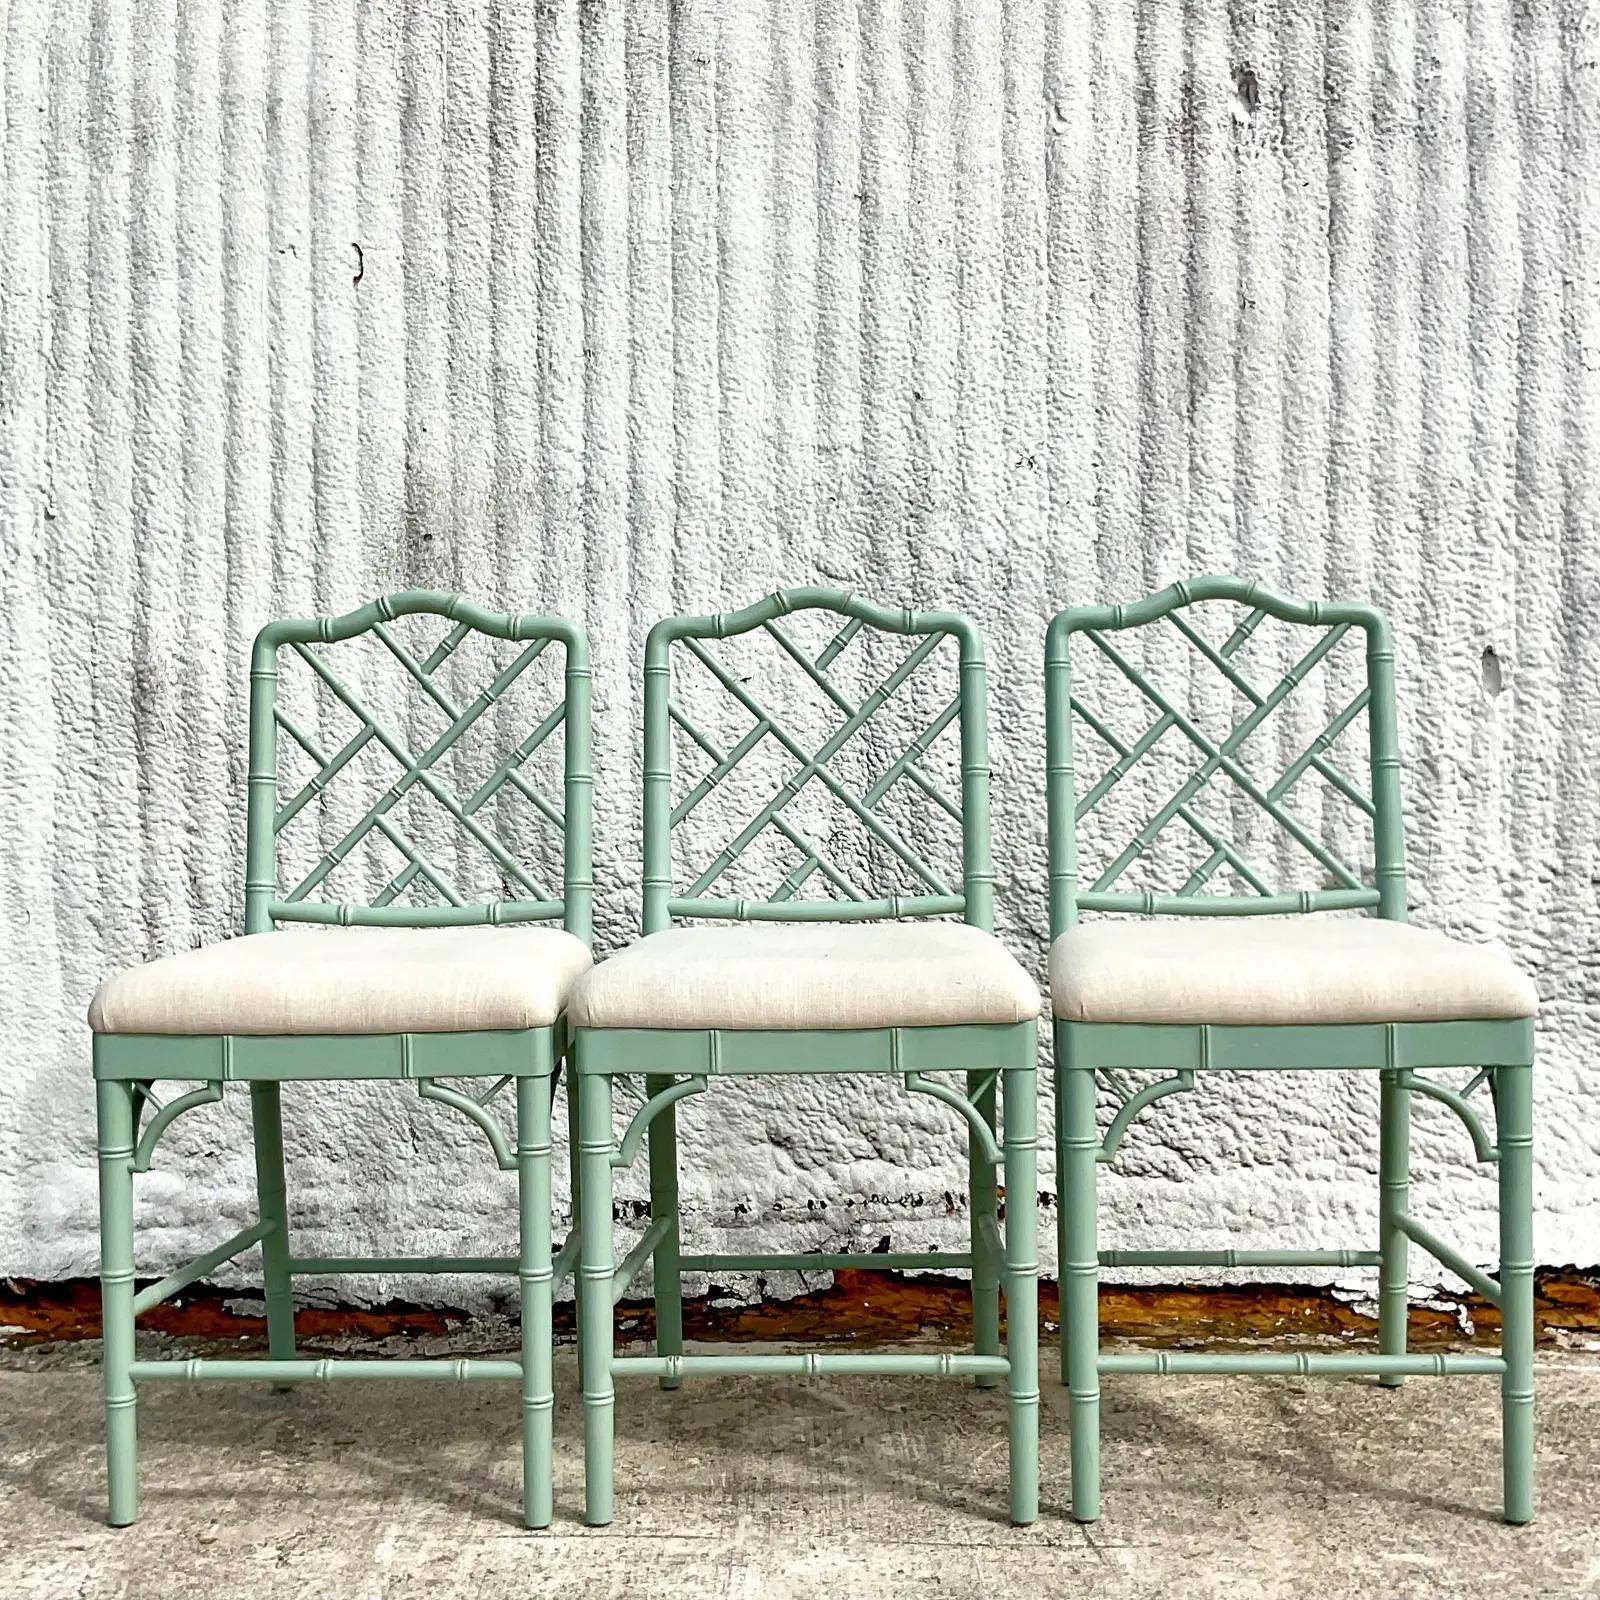 A chic set of three vintage Coastal bar stools. The classic Dayna barstools from Ballard Designs. A beautiful pale green in a matte finish. Acquired from a Palm Beach estate.